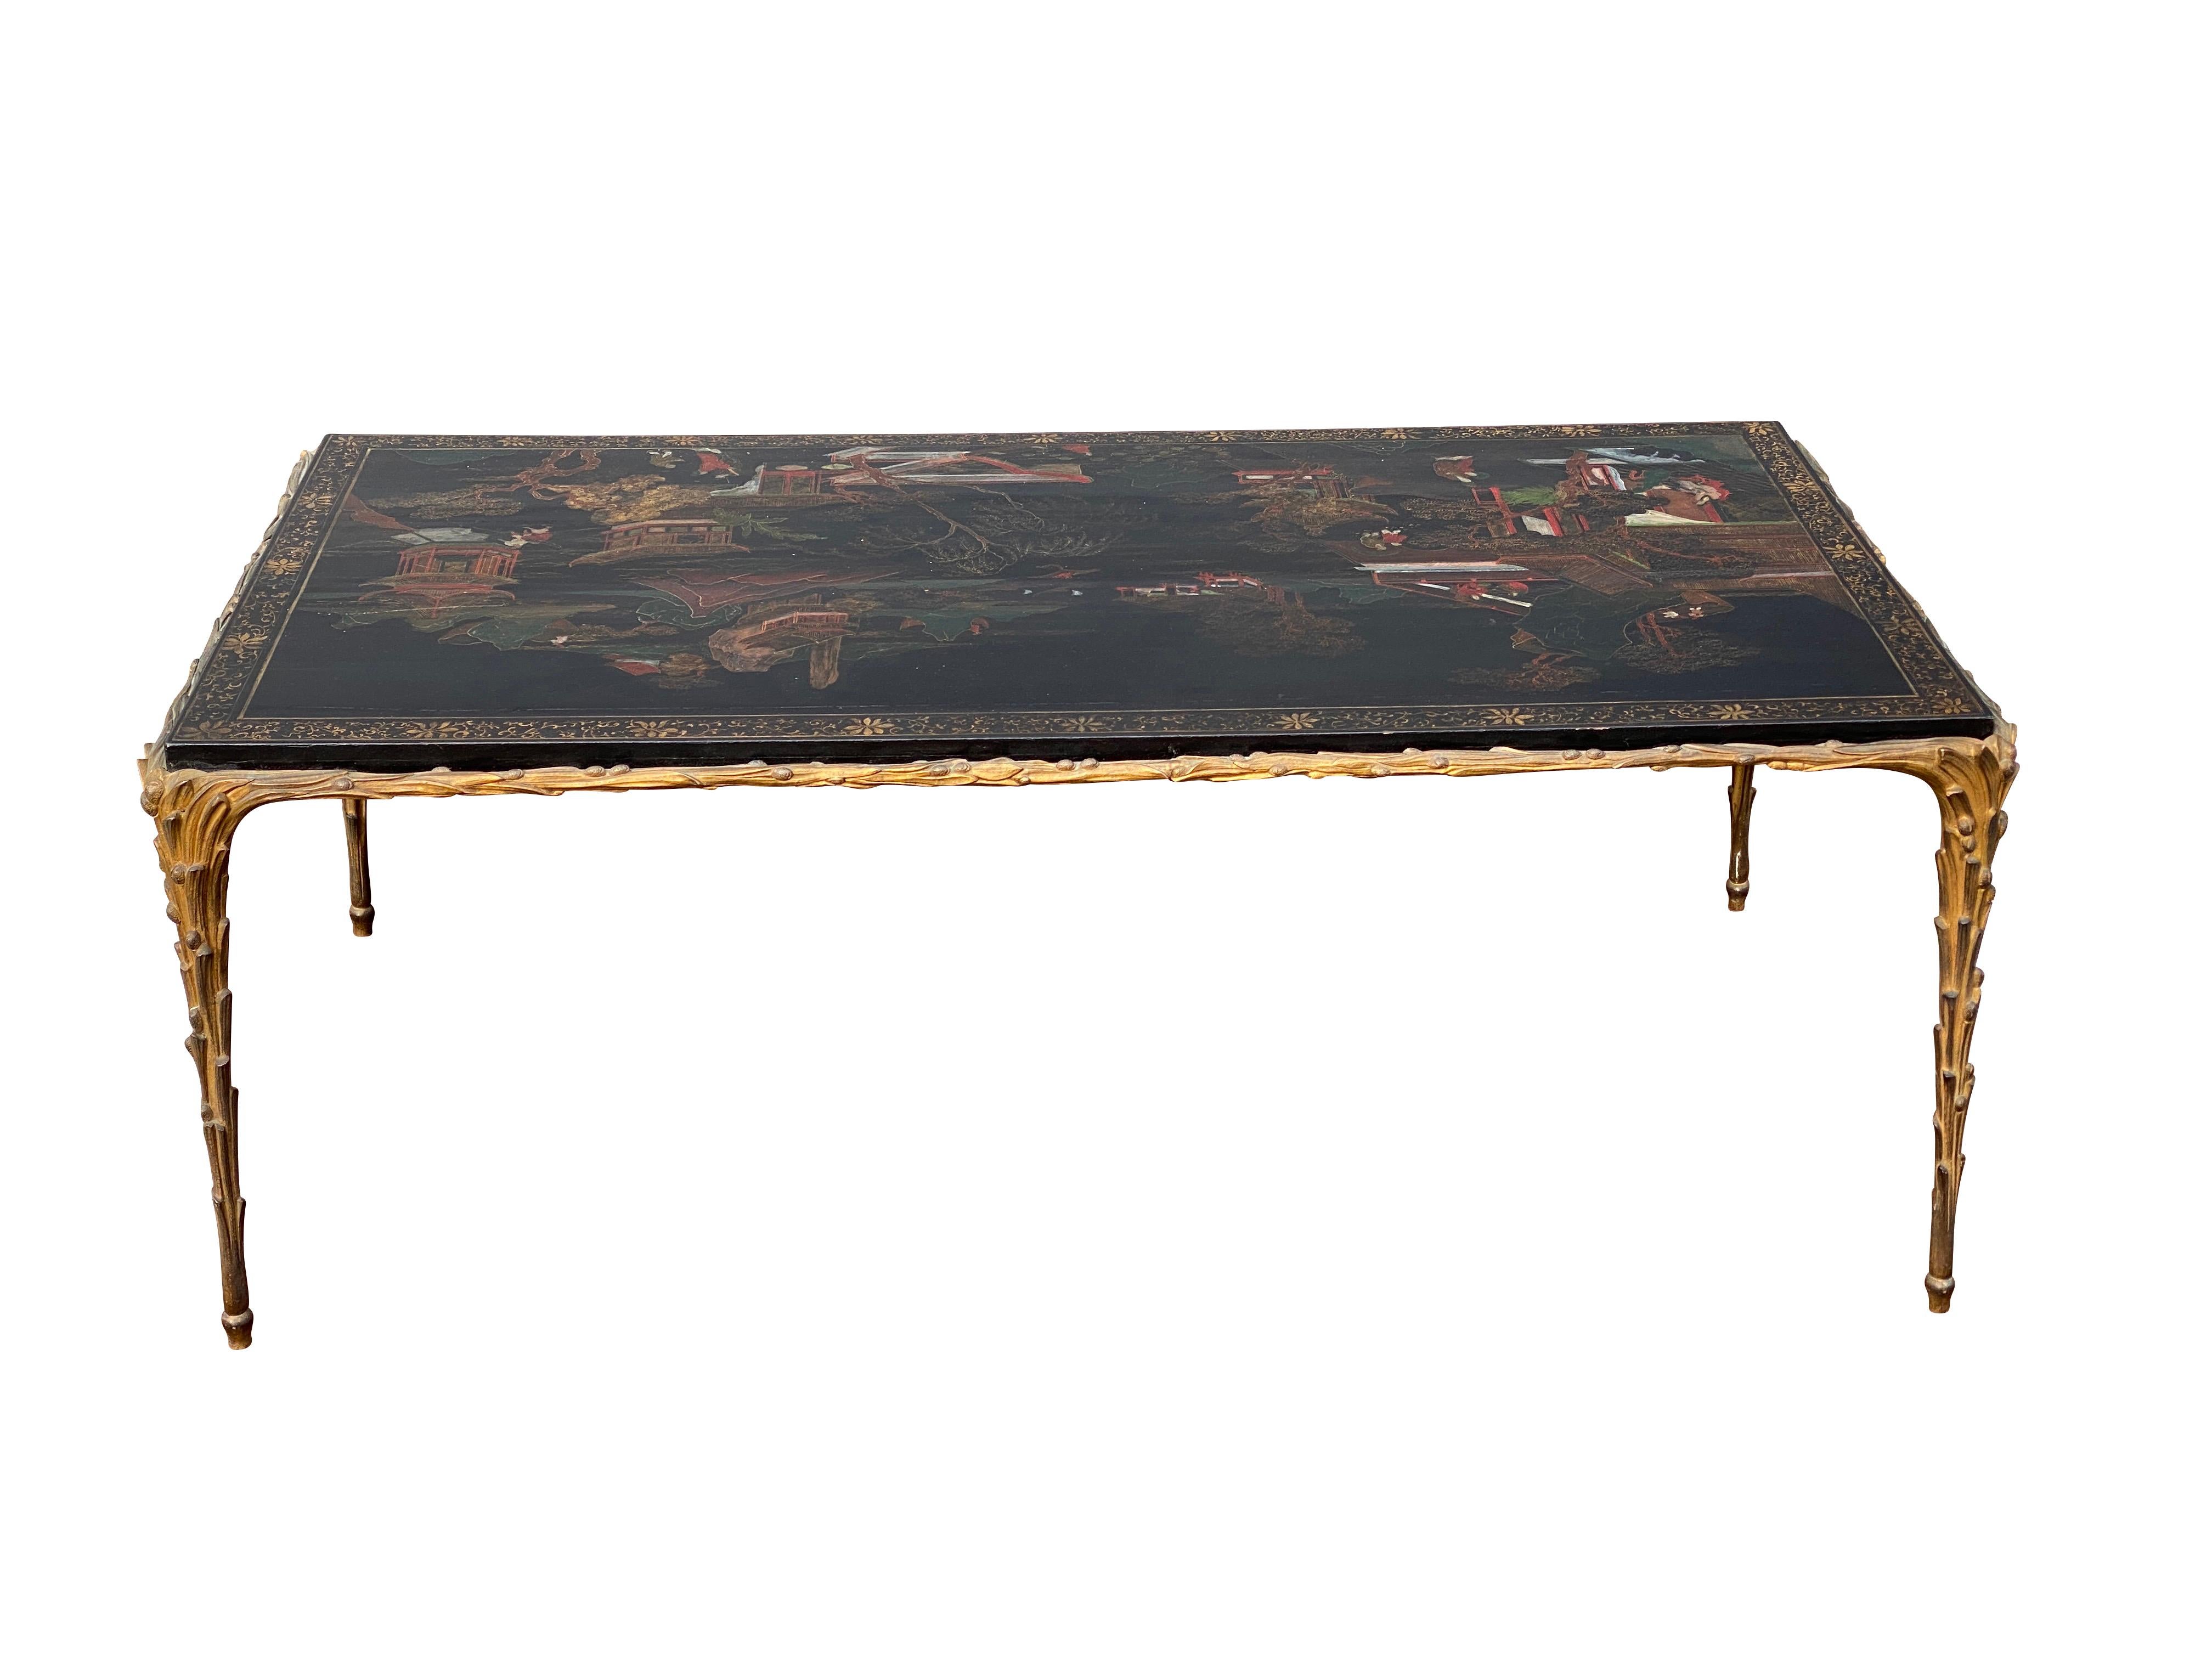 Rectangular inset Asian inspired lacquered wood top set in a conforming laurel leaf and berry frame, raised on square tapered conforming legs.
Oxidation to the bronze frame. A nice subtle patina.